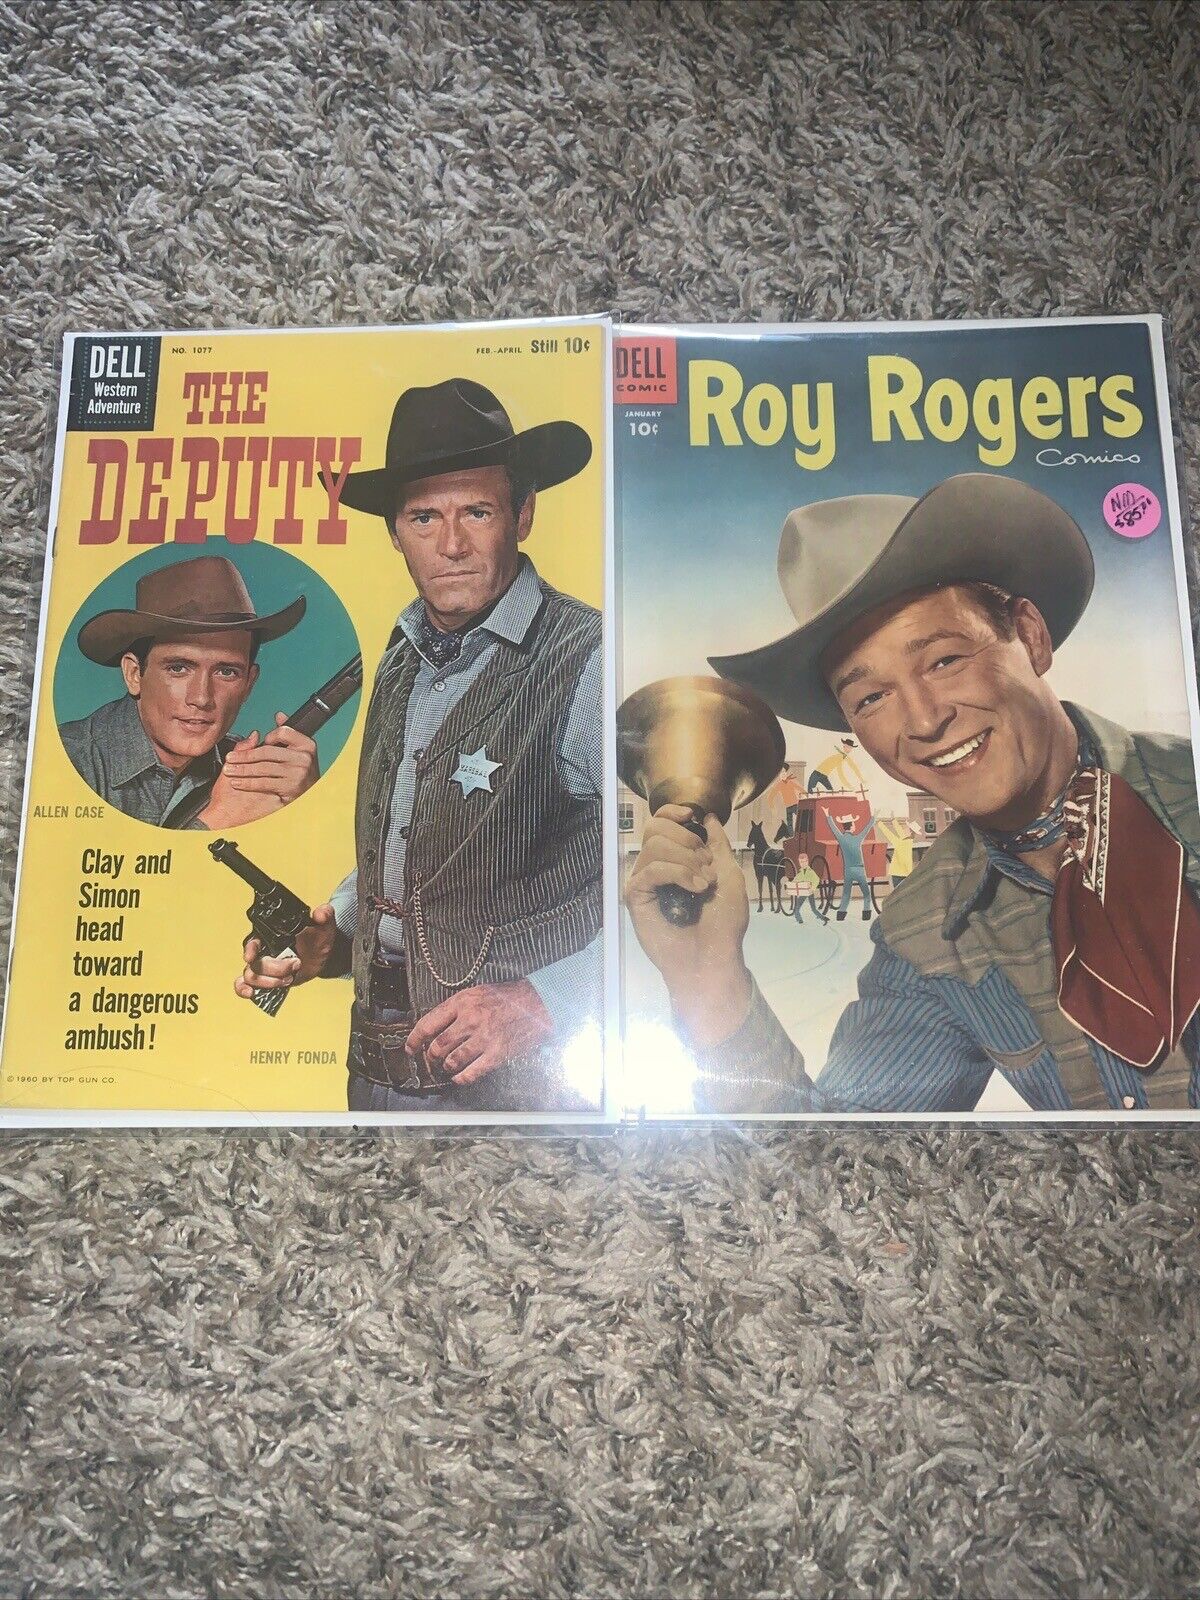 Vintage Dell The Deputy no. 1077/ Roy Rodgers January books Near Mint